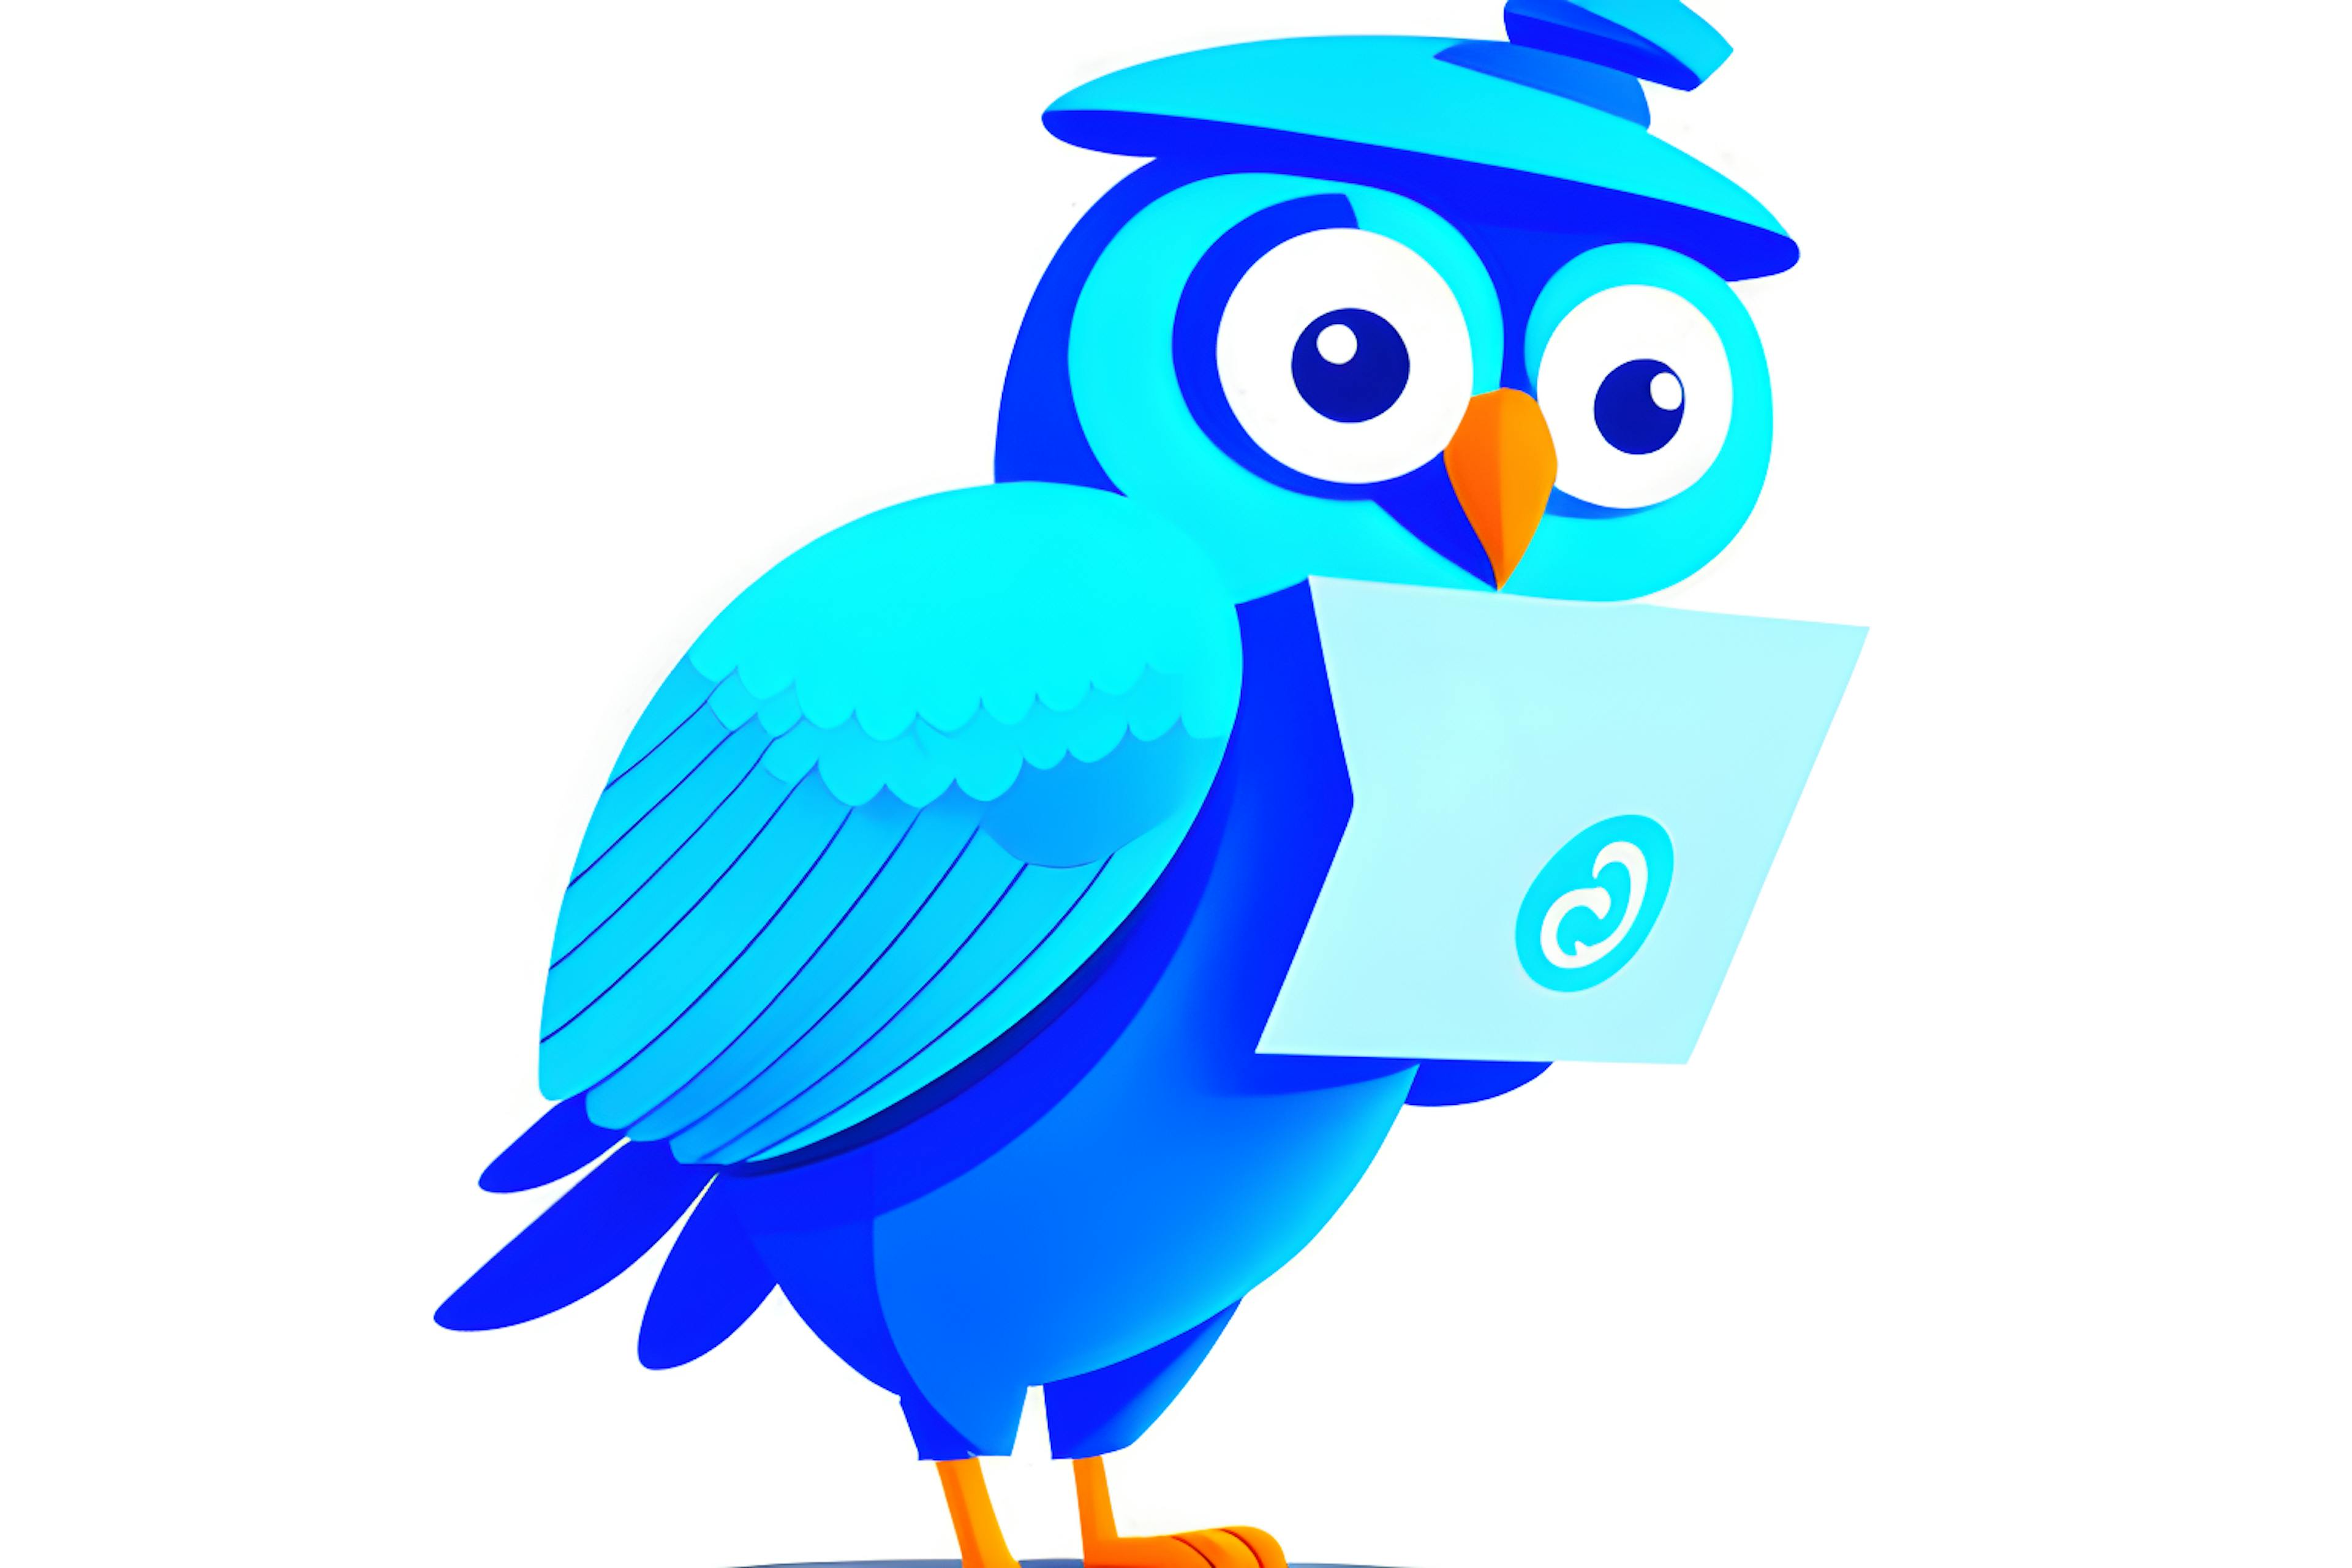 featured image - A Full Look at Parag Agrawal's Letter to Twitter Inc. 